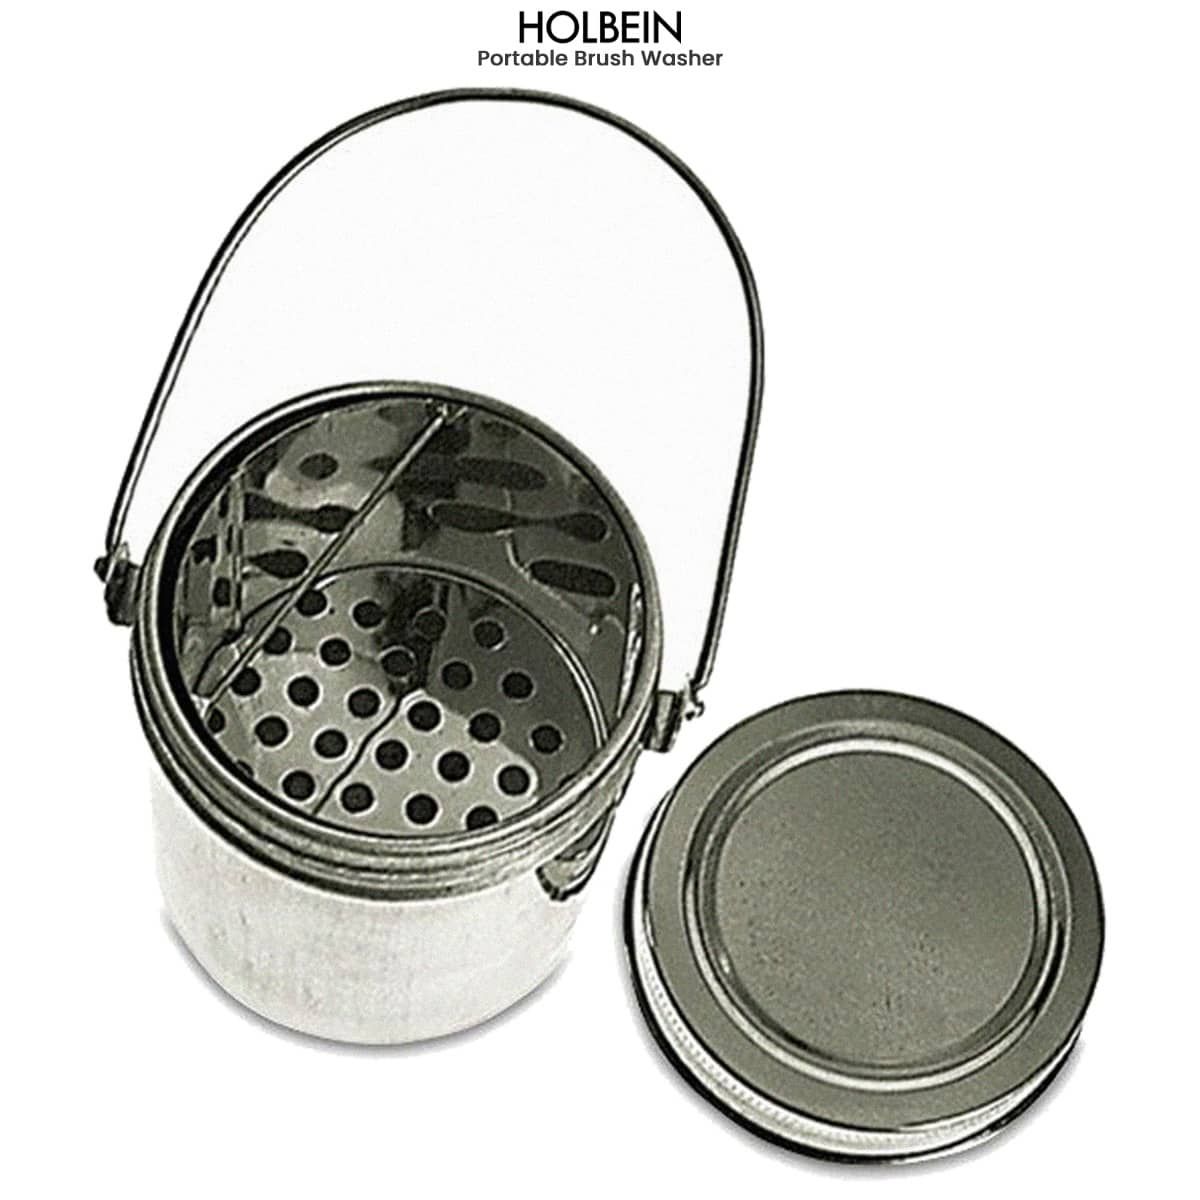 Holbein Portable Brush Washer